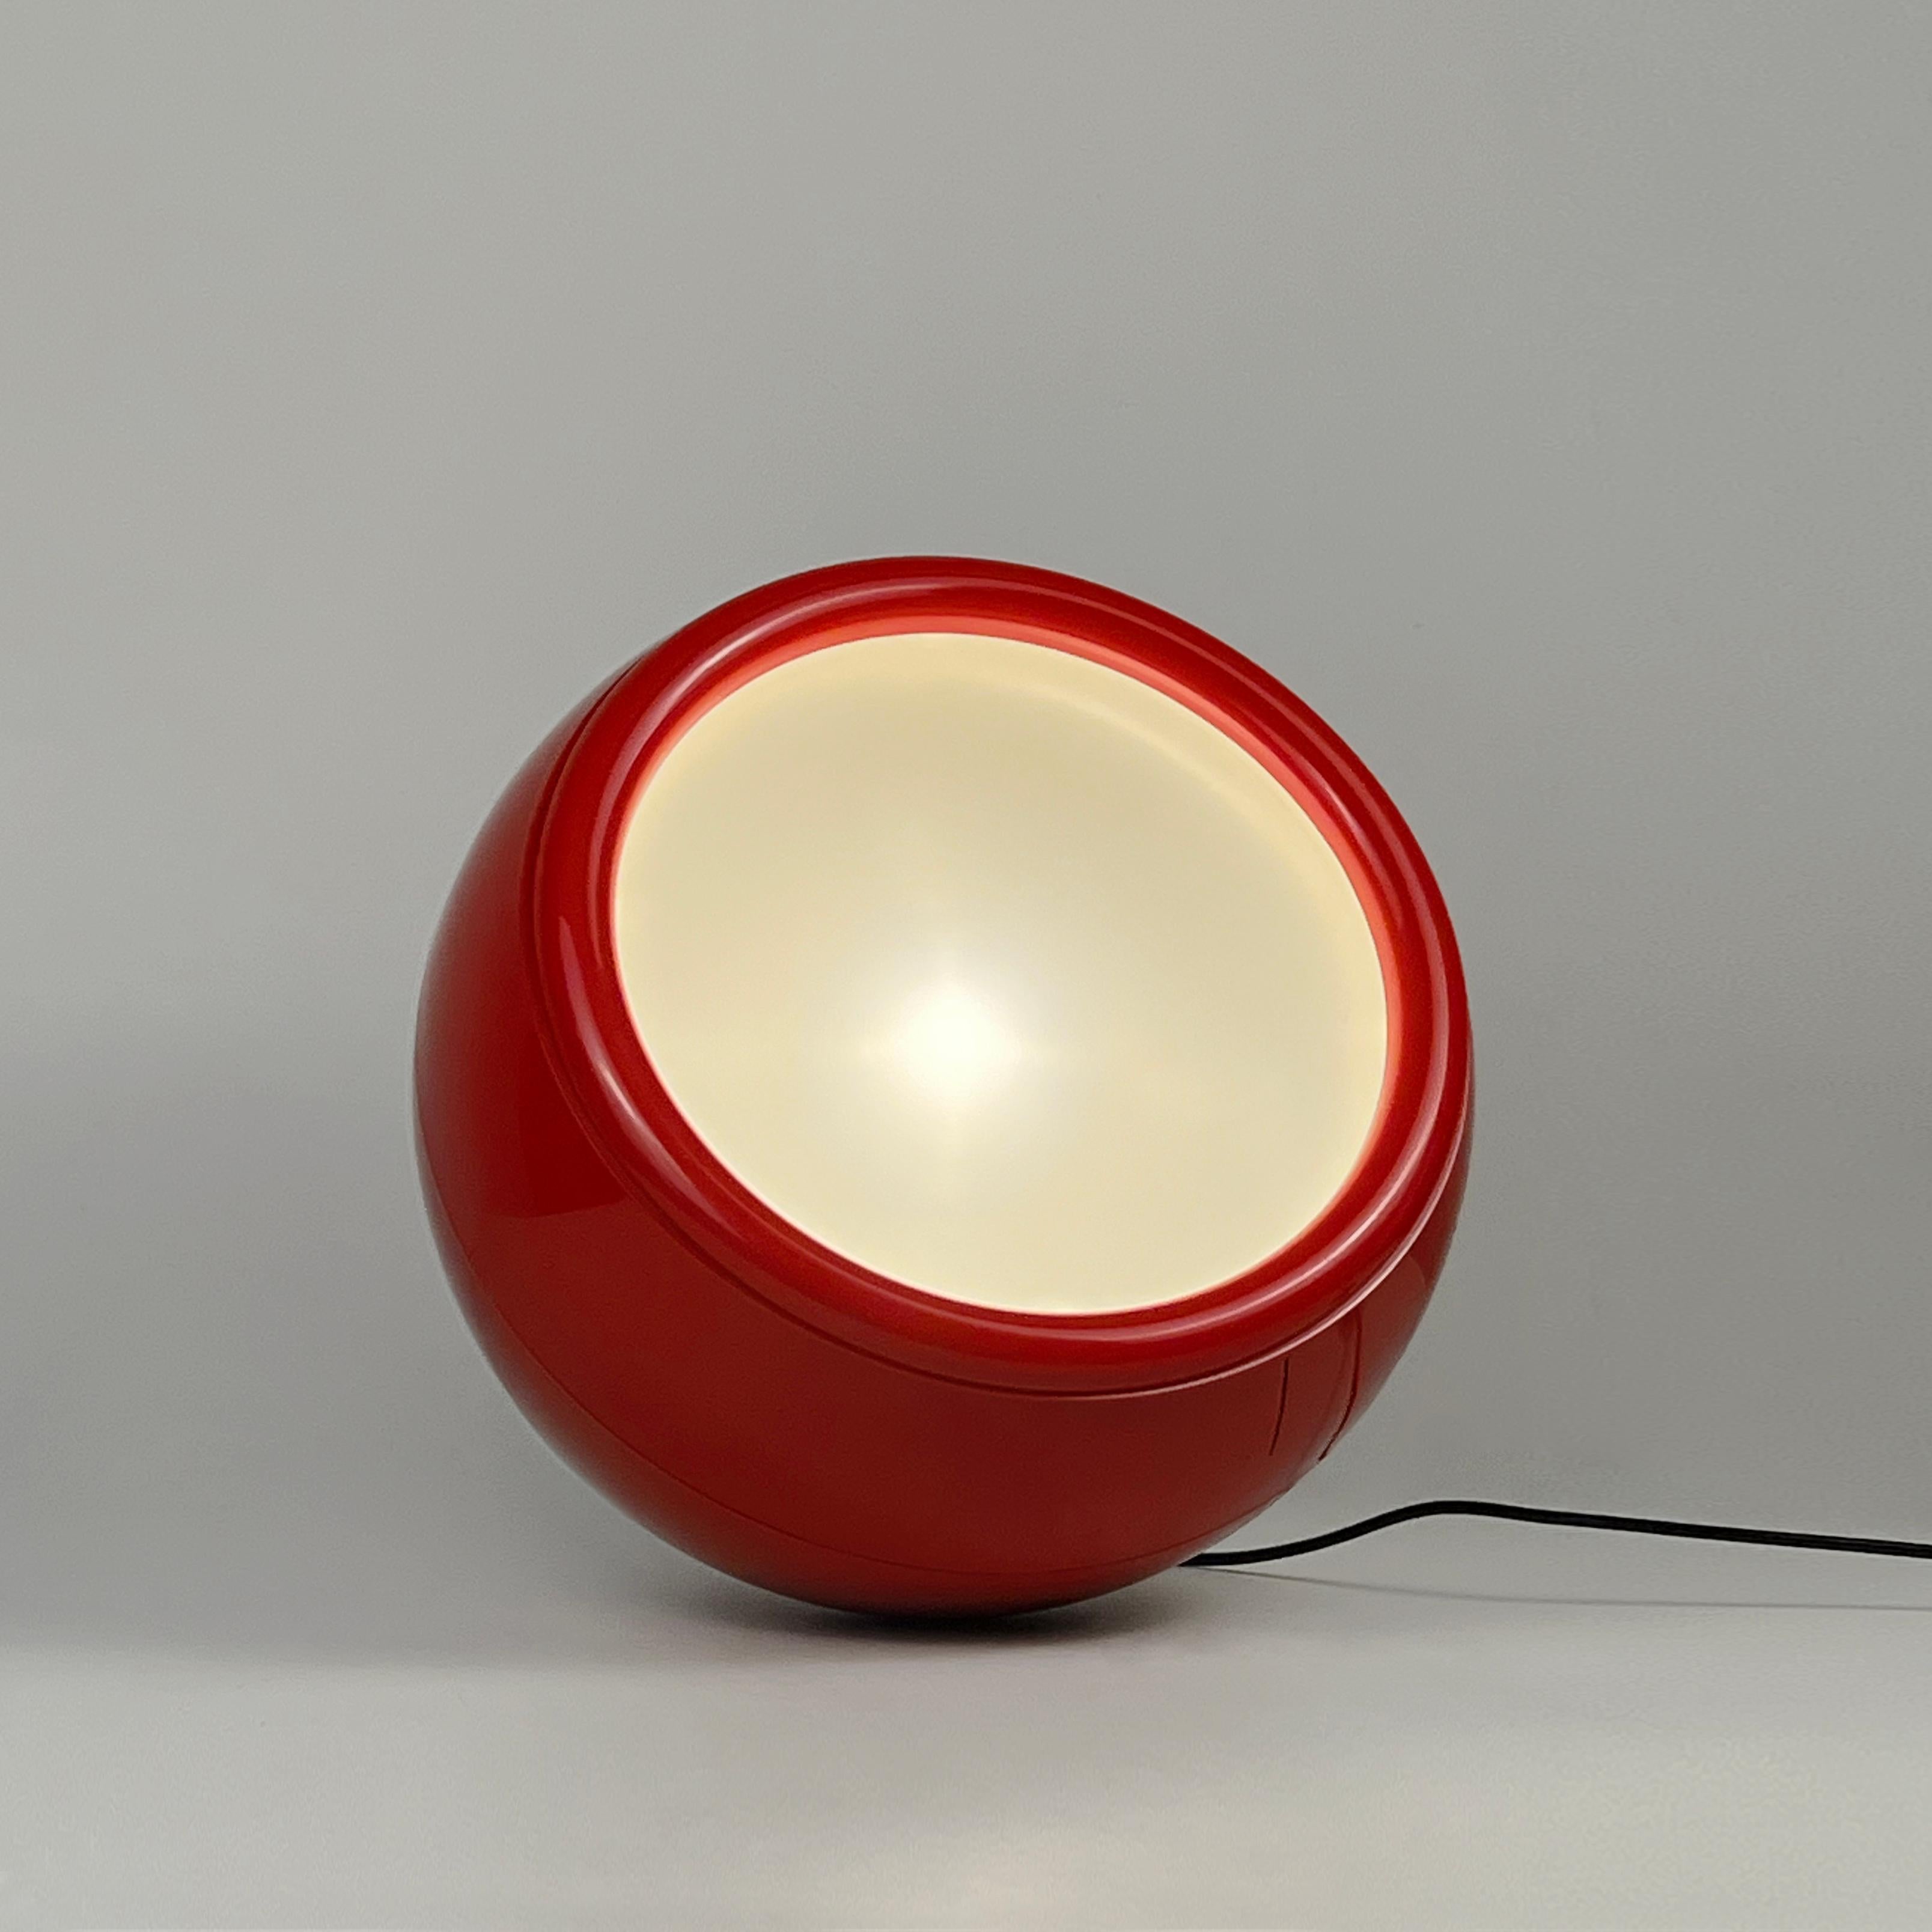 Red Pallade (1st Ed. 1968) floor lamp designed by Studio Tetrarch for Artemide For Sale 12